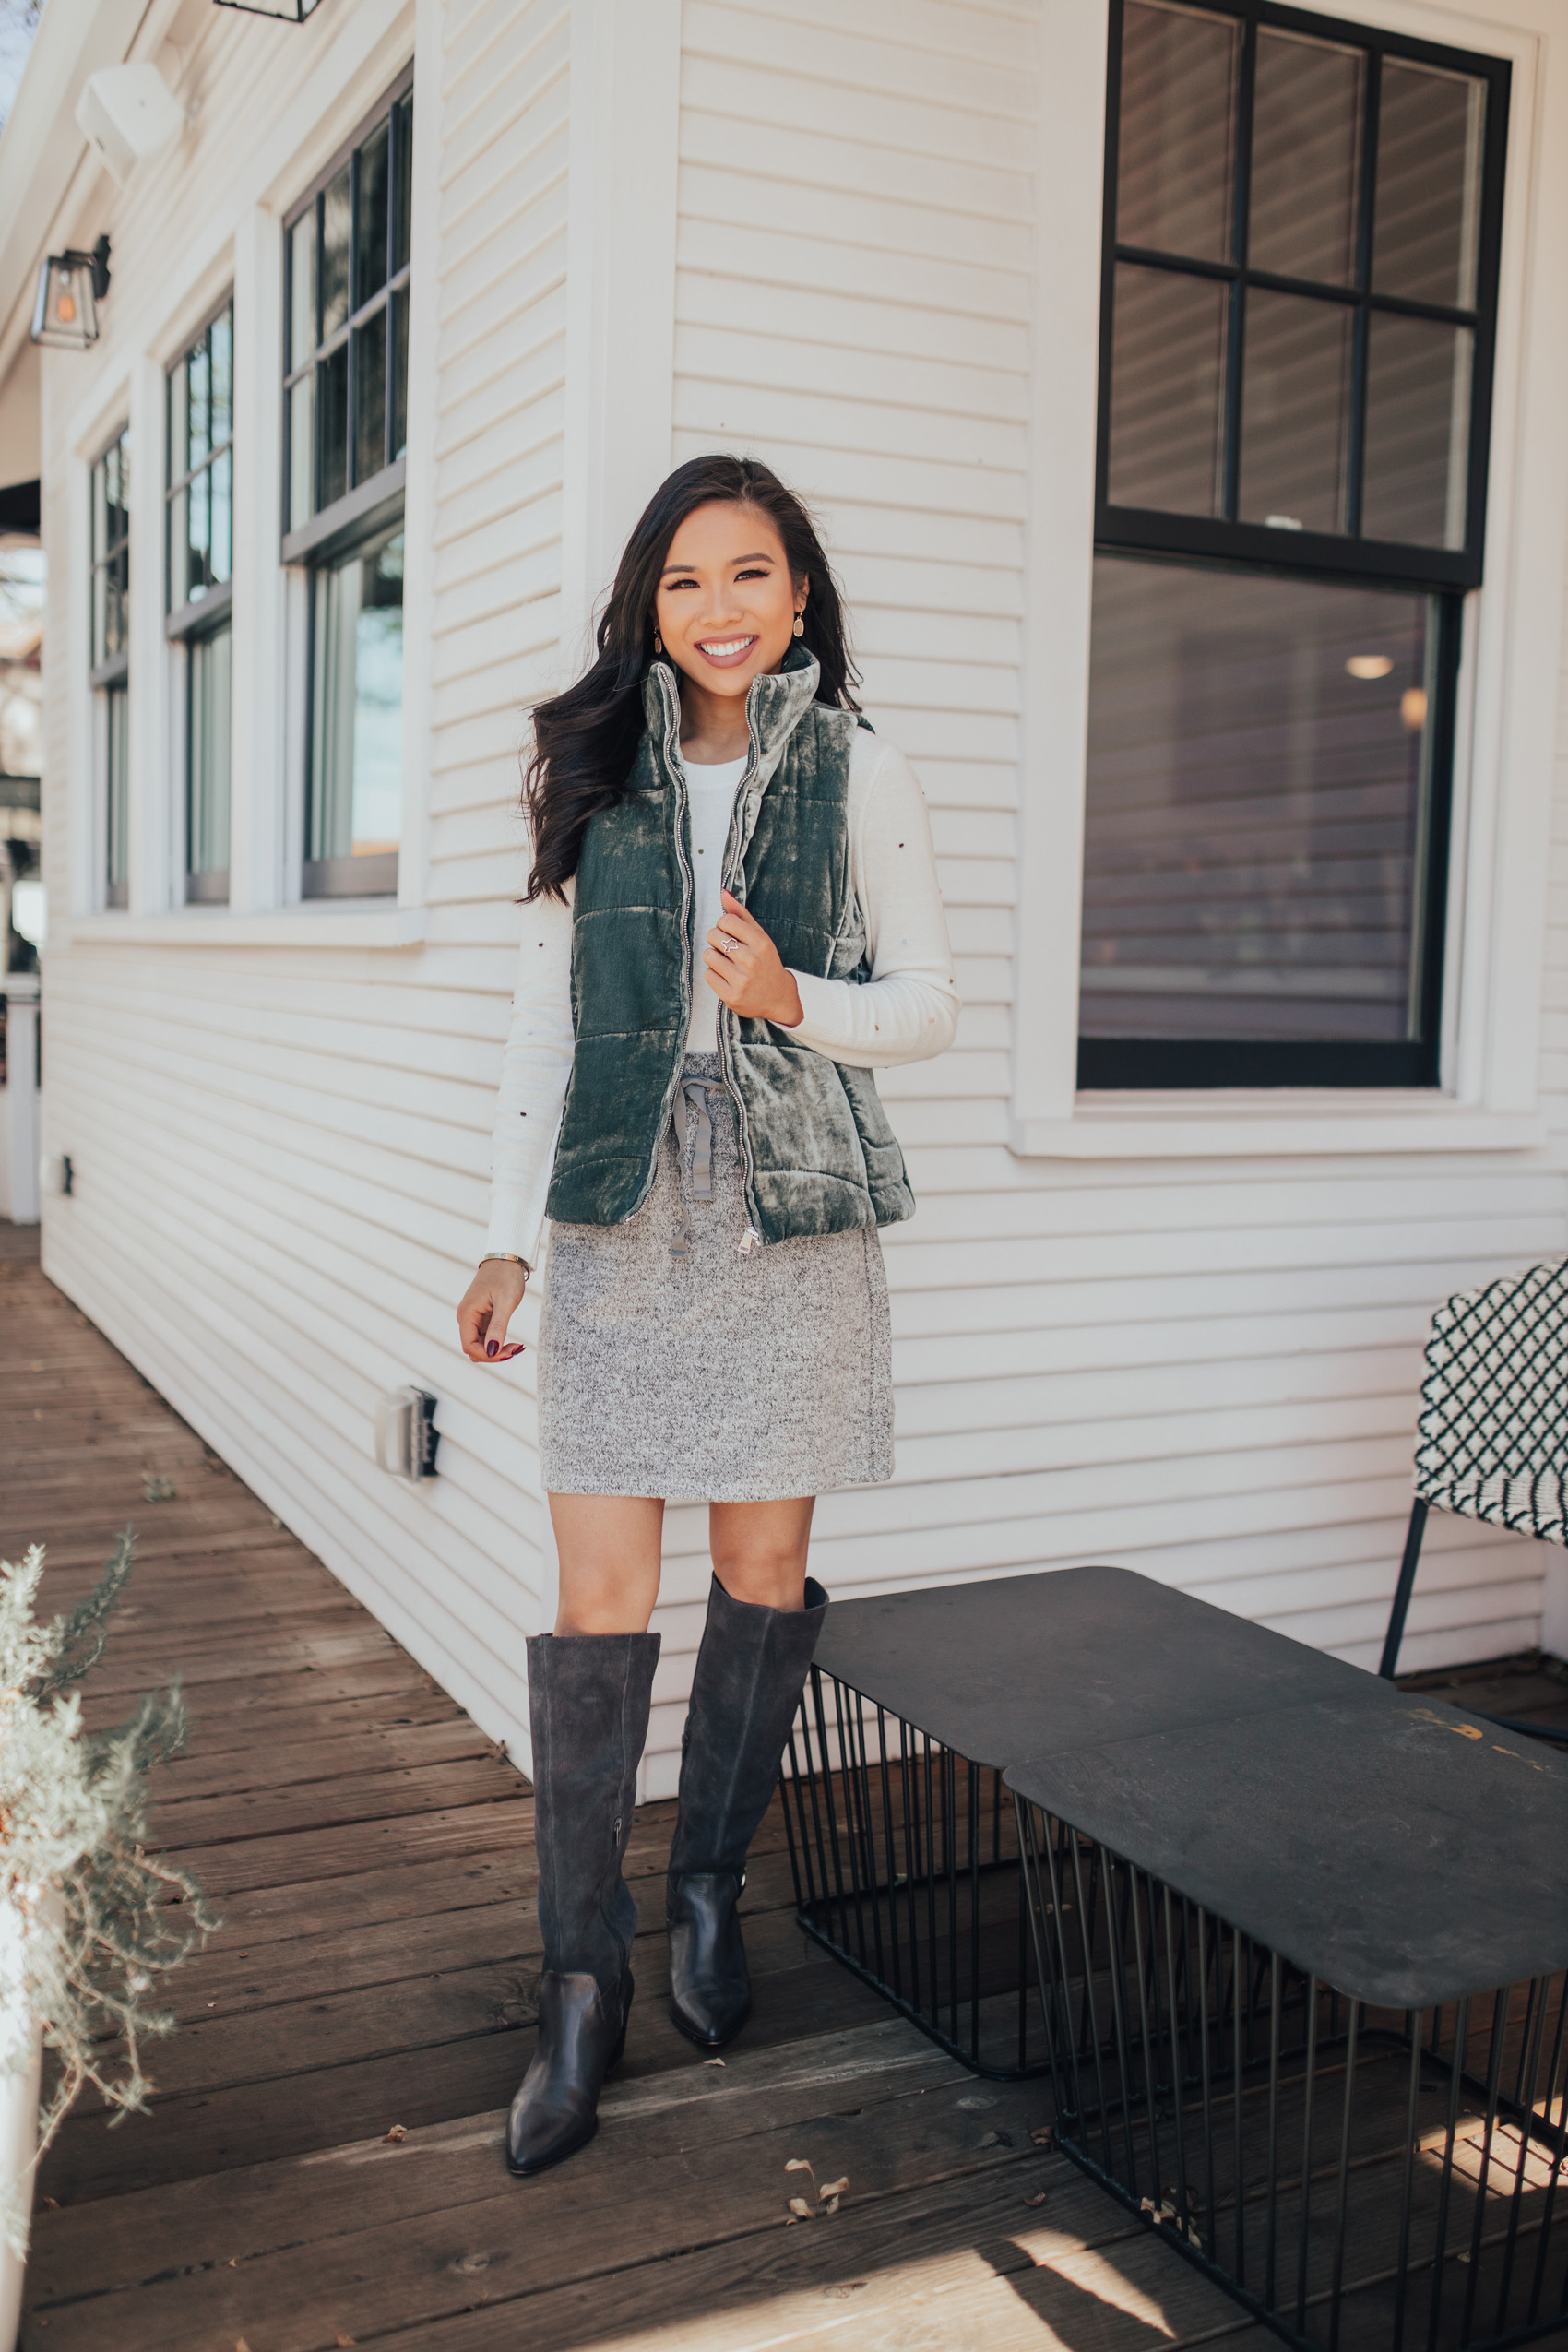 Velvet vest for a simple fall outfit idea with knee high boots on Petite Blogger Hoang-Kim